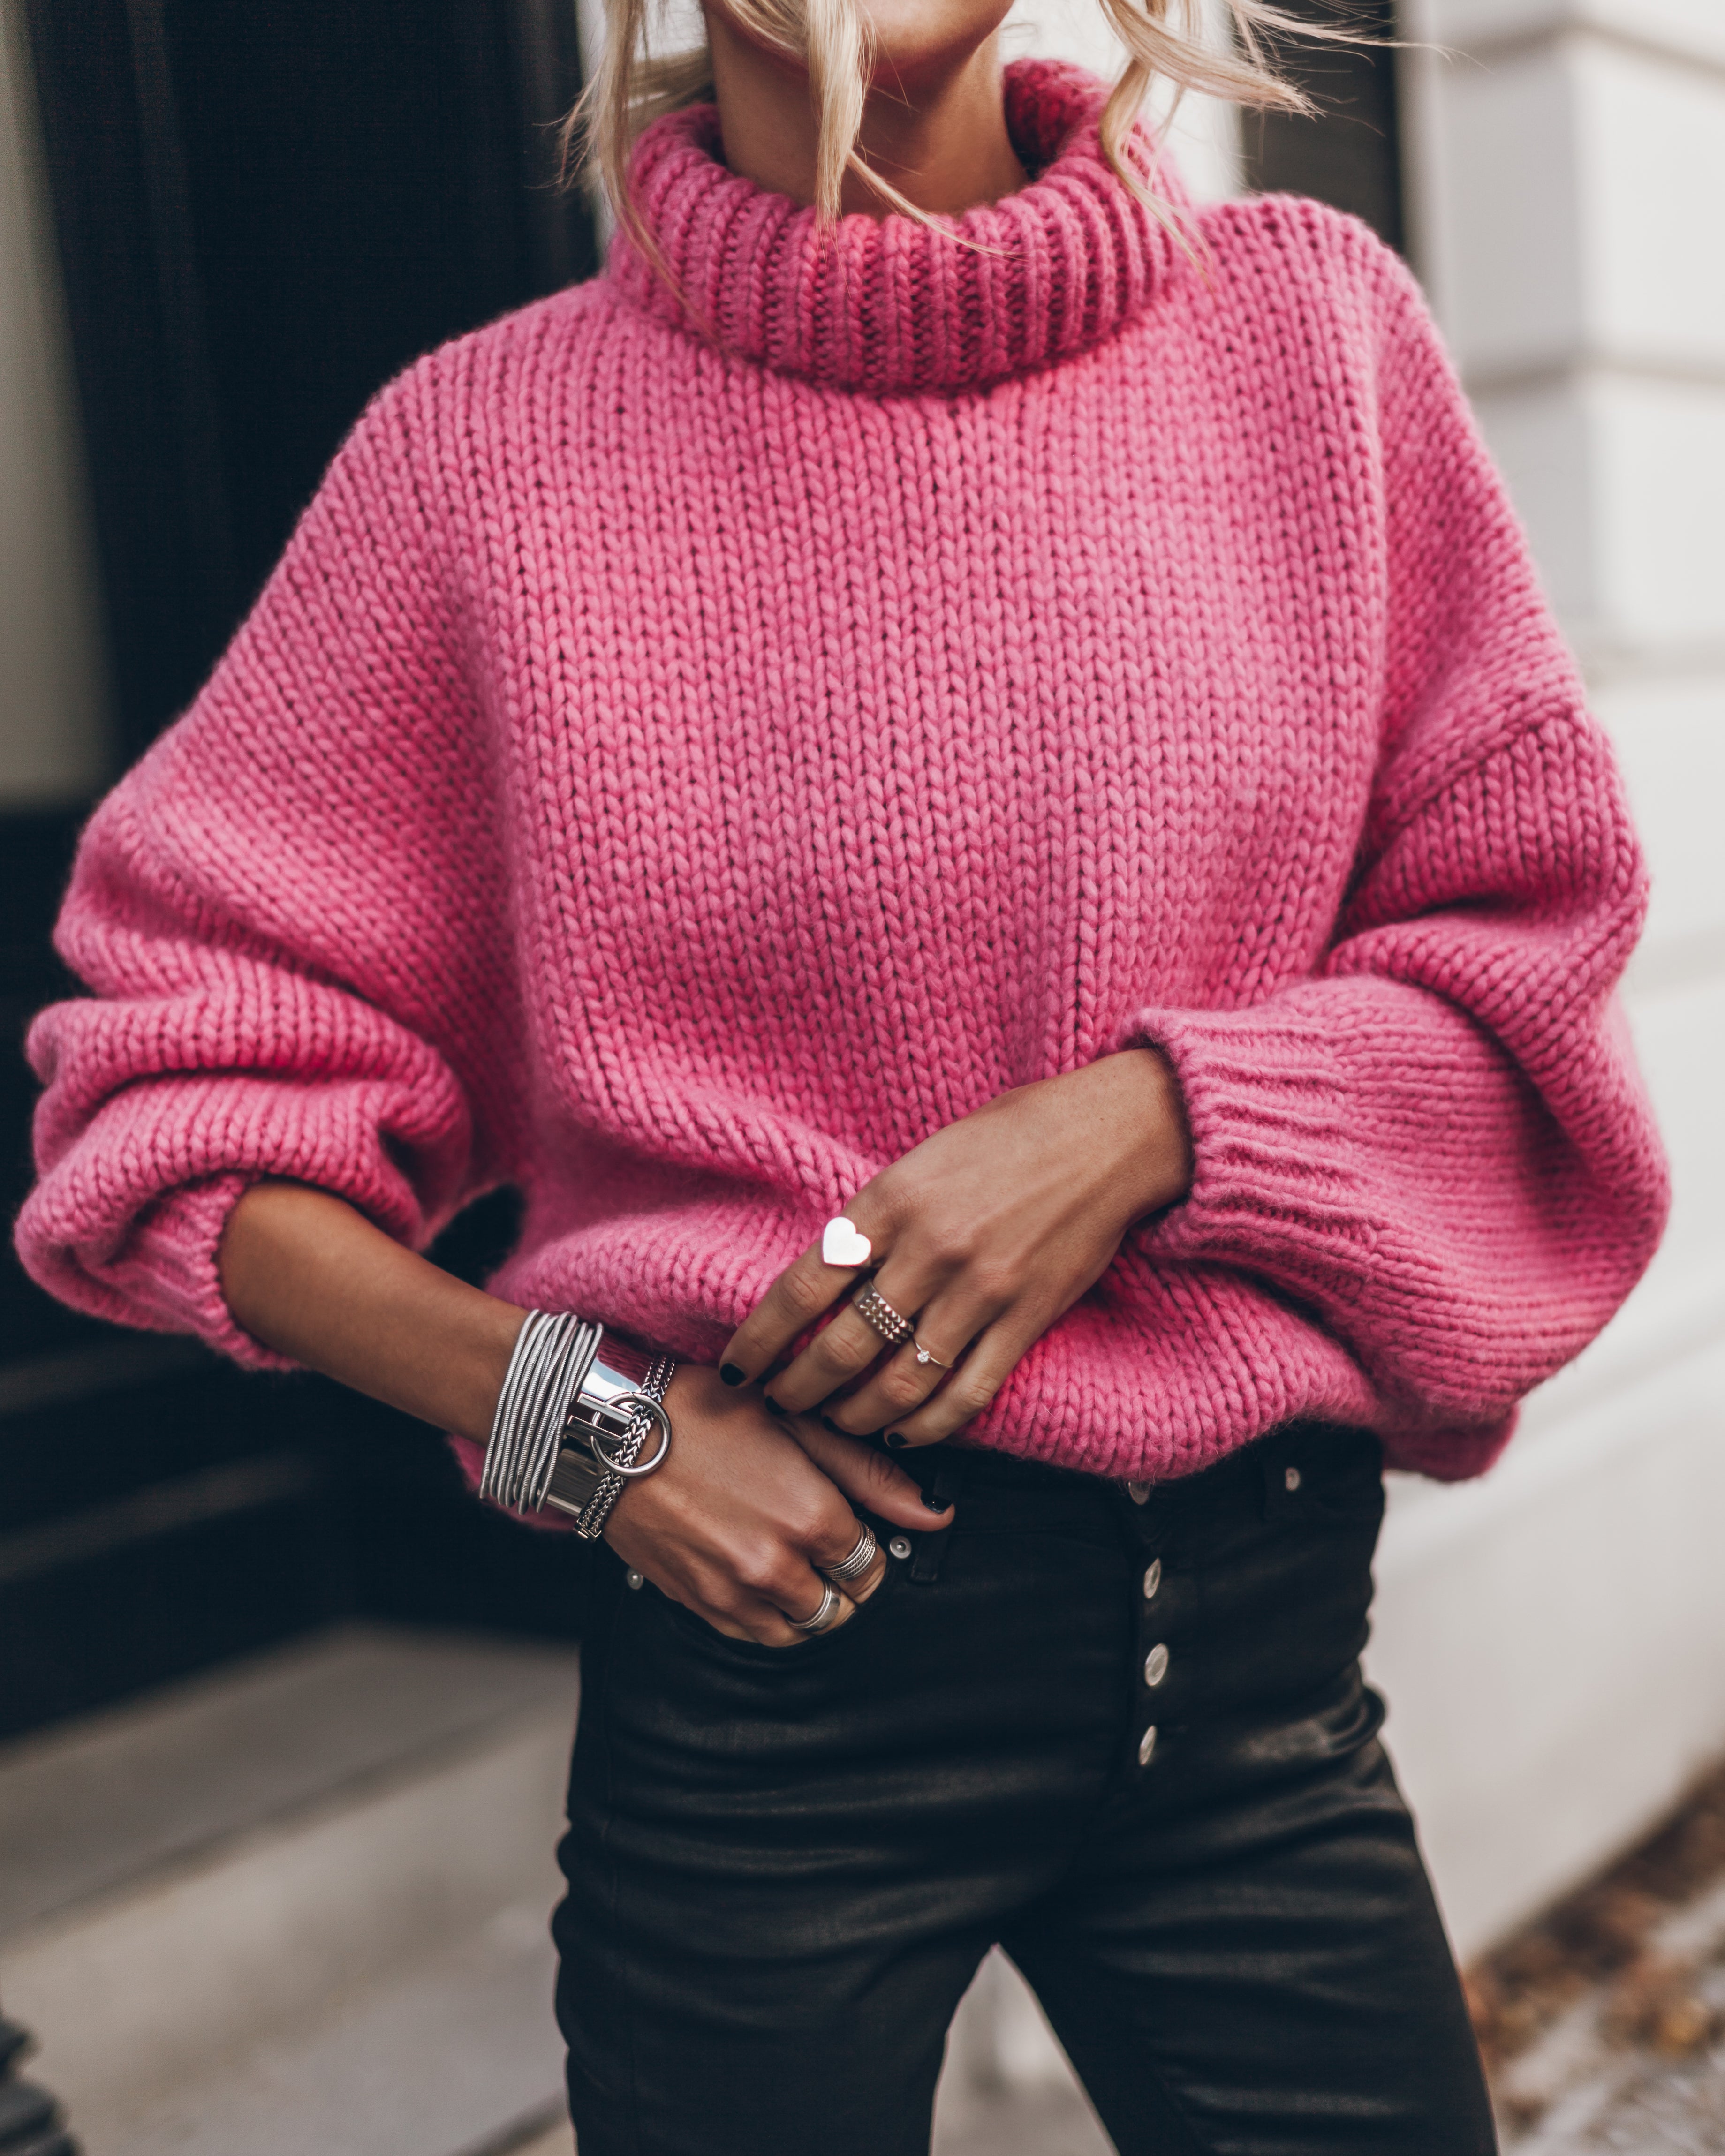 The Pink Knitted Sweater